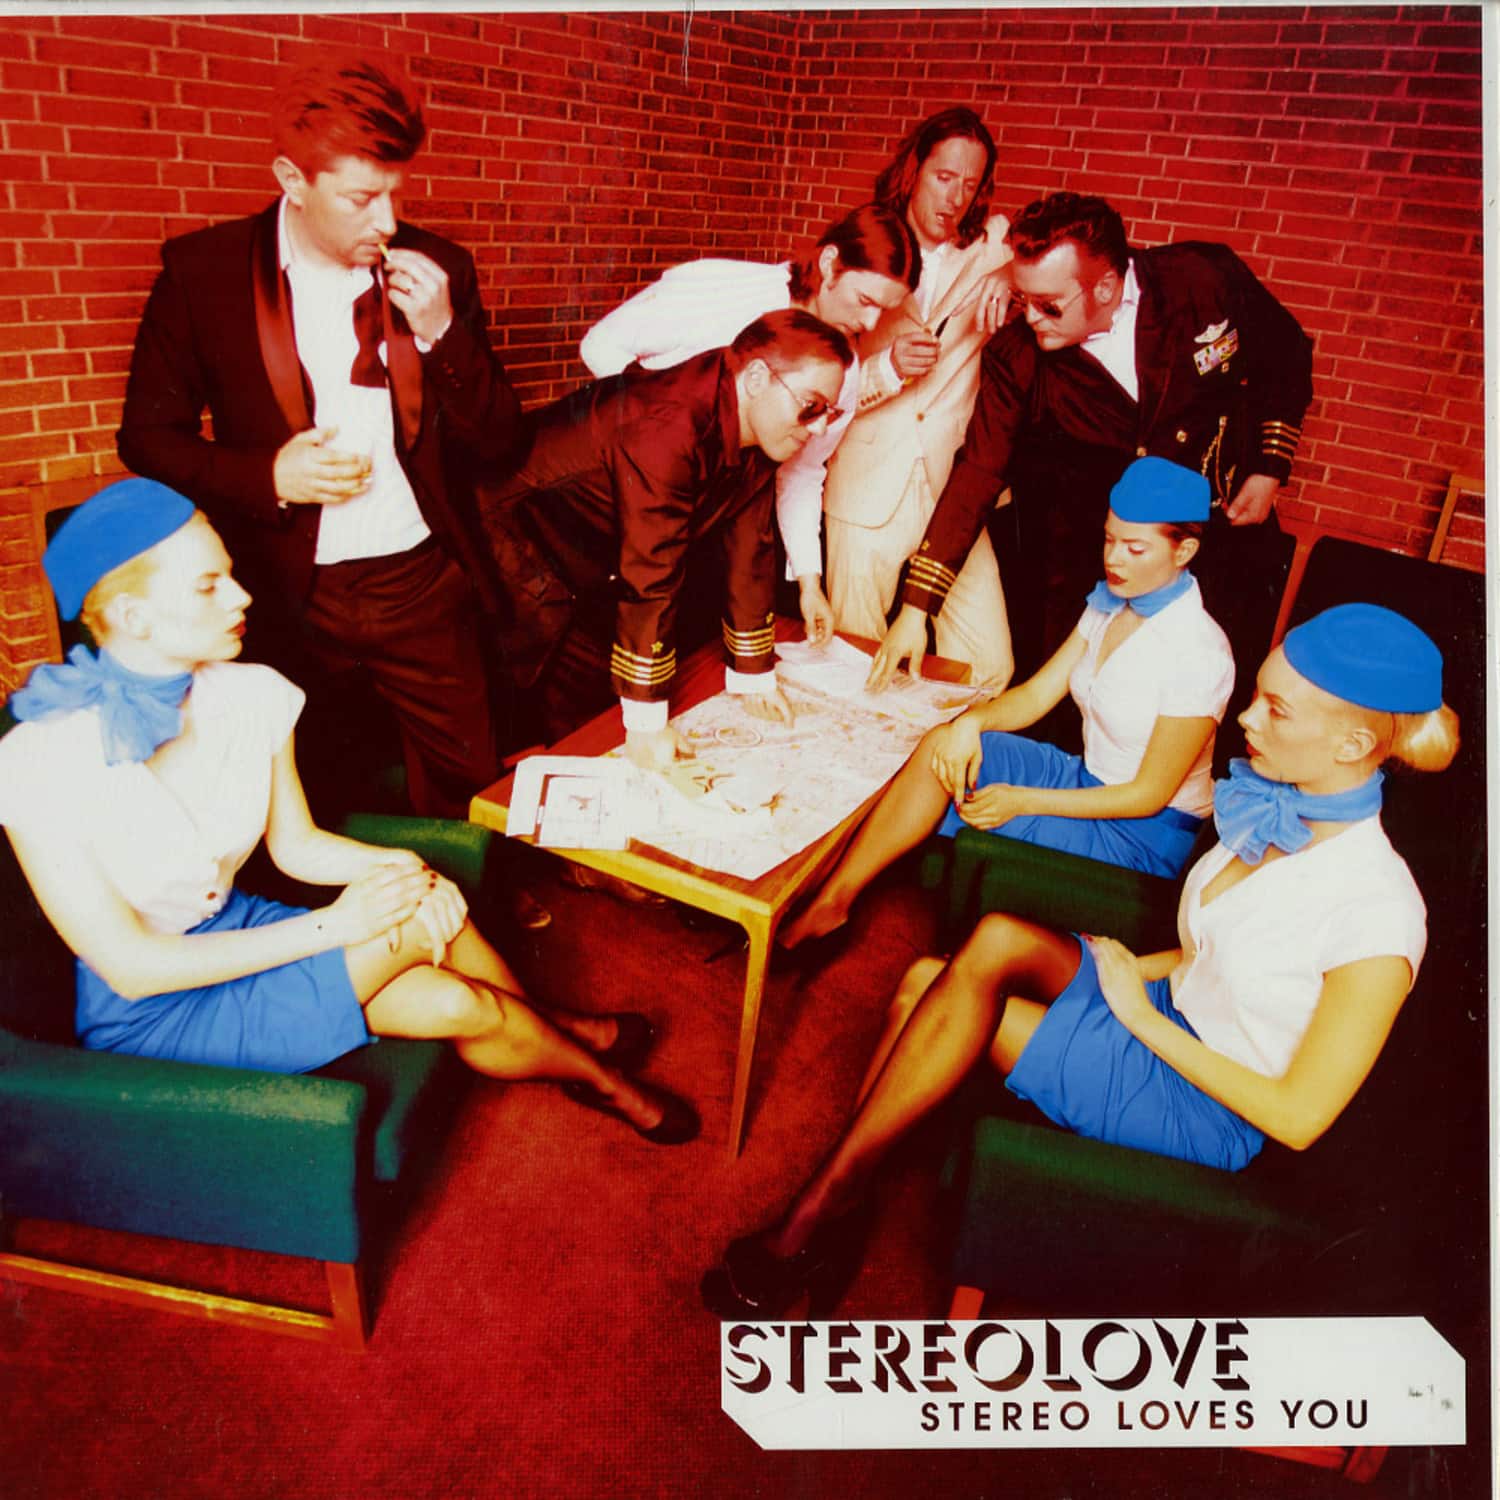 Stereolove - STEREO LOVES YOU 